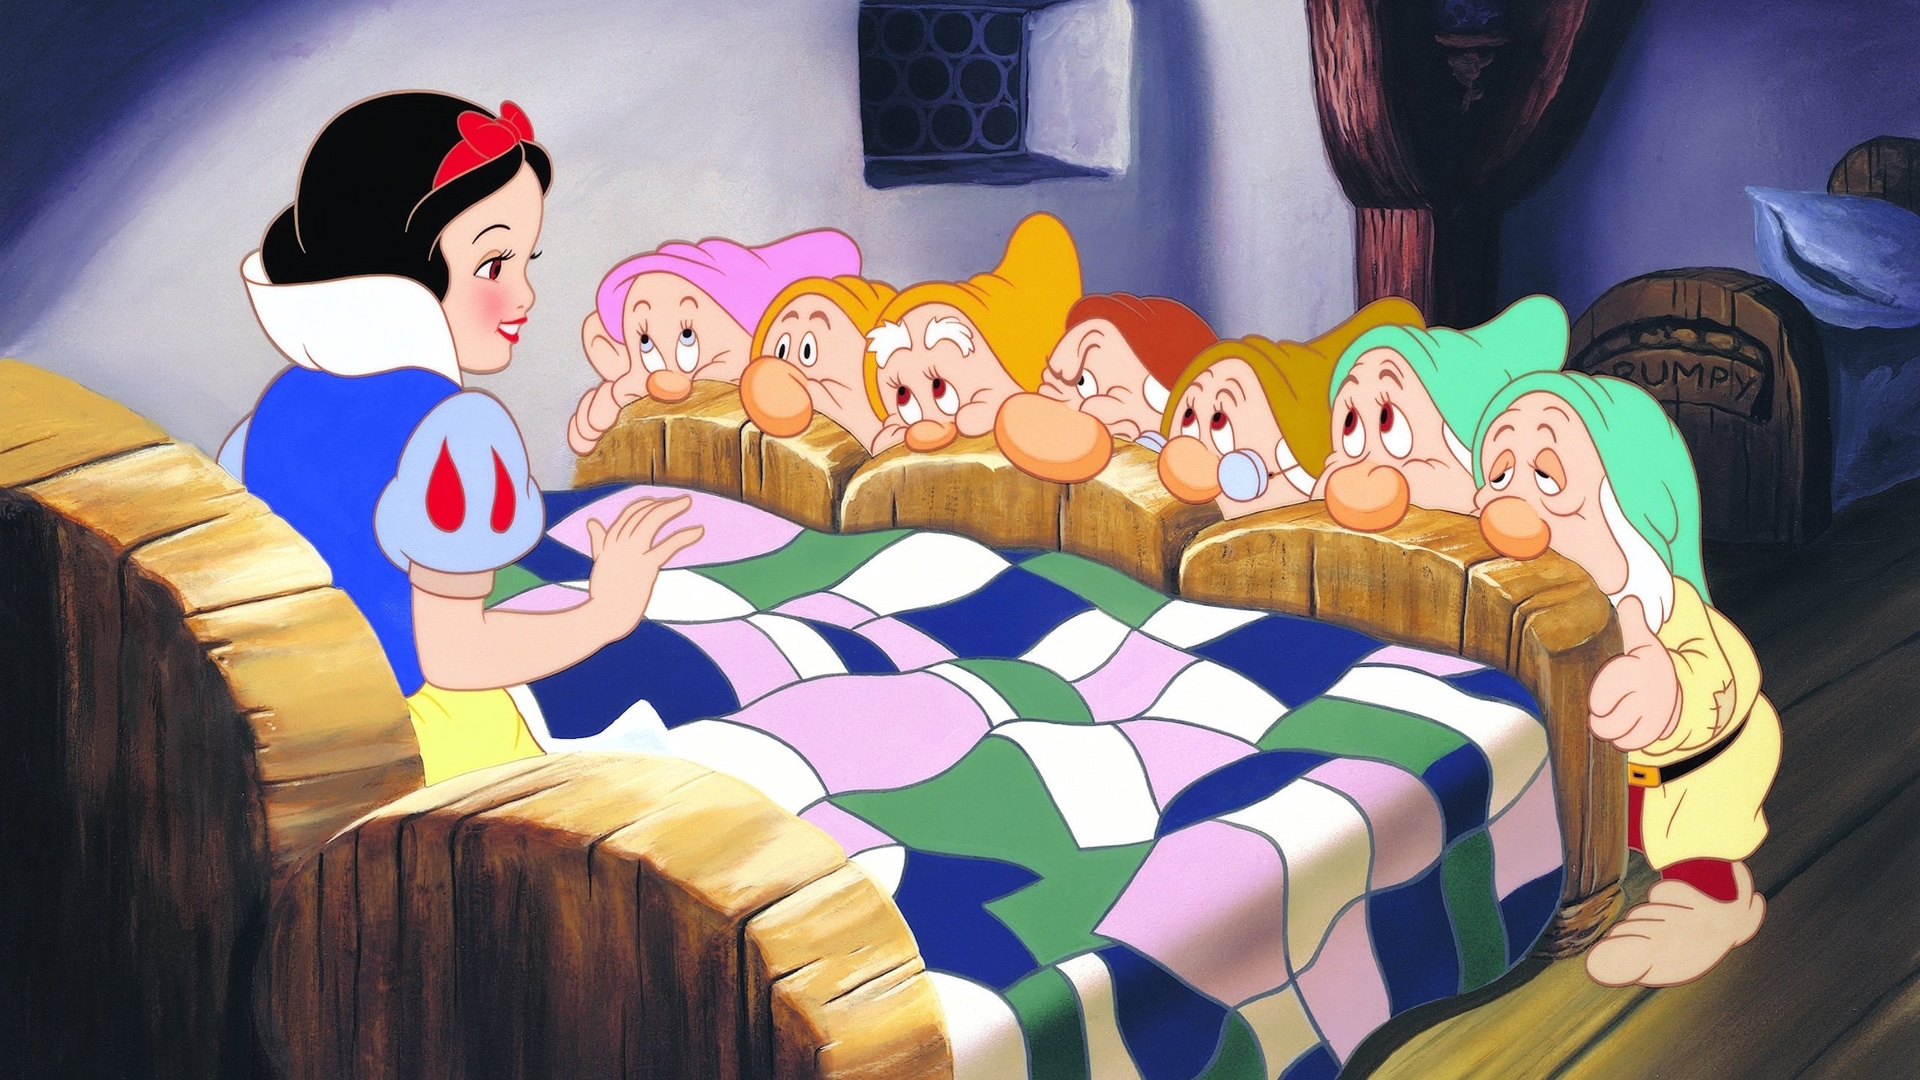 Snow White And The Seven Dwarfs Disney Wallpapers - Wallpaper Cave